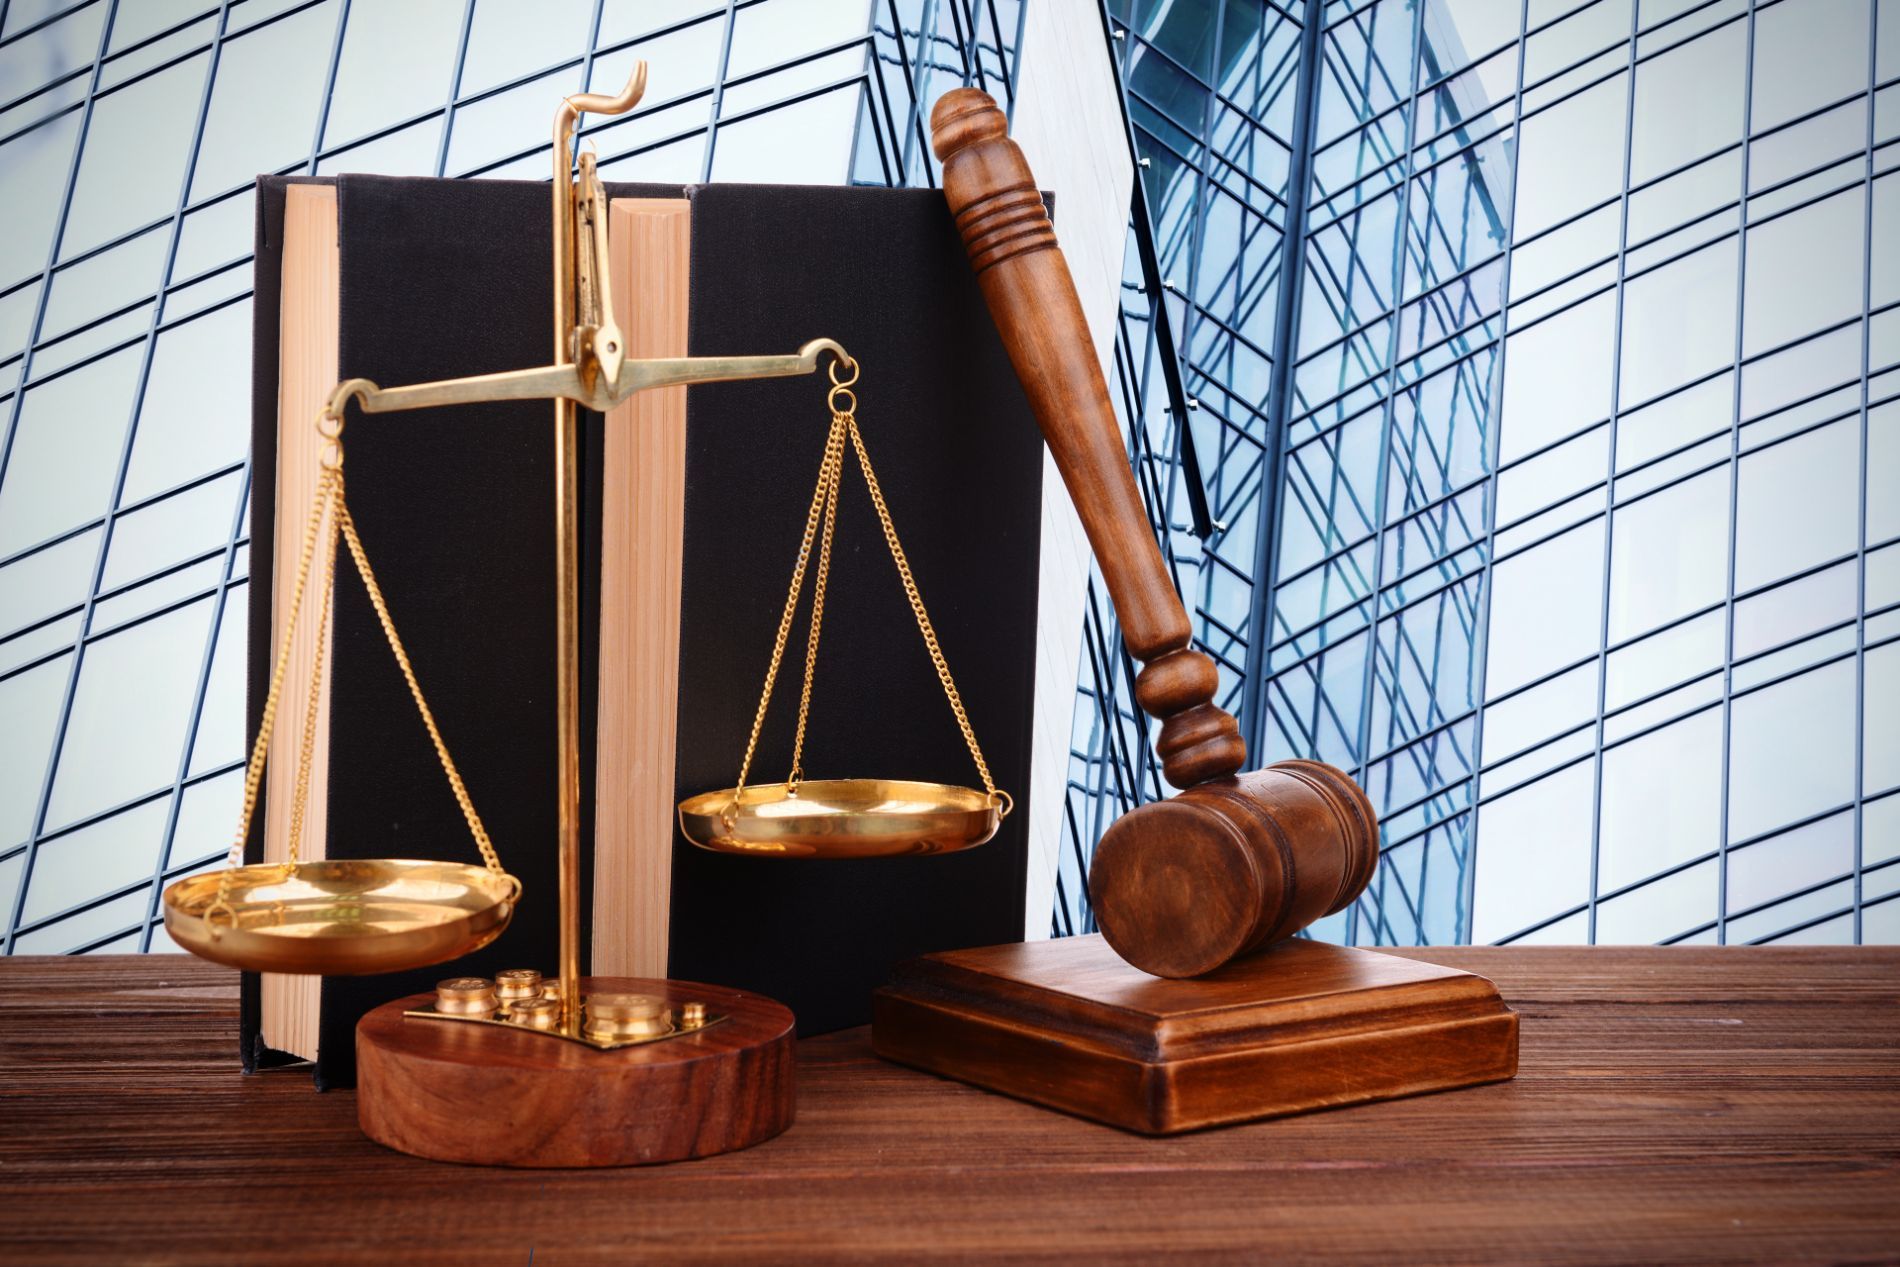 A statuette of the scales of Justice next to a gavel resting vertically against a legal book